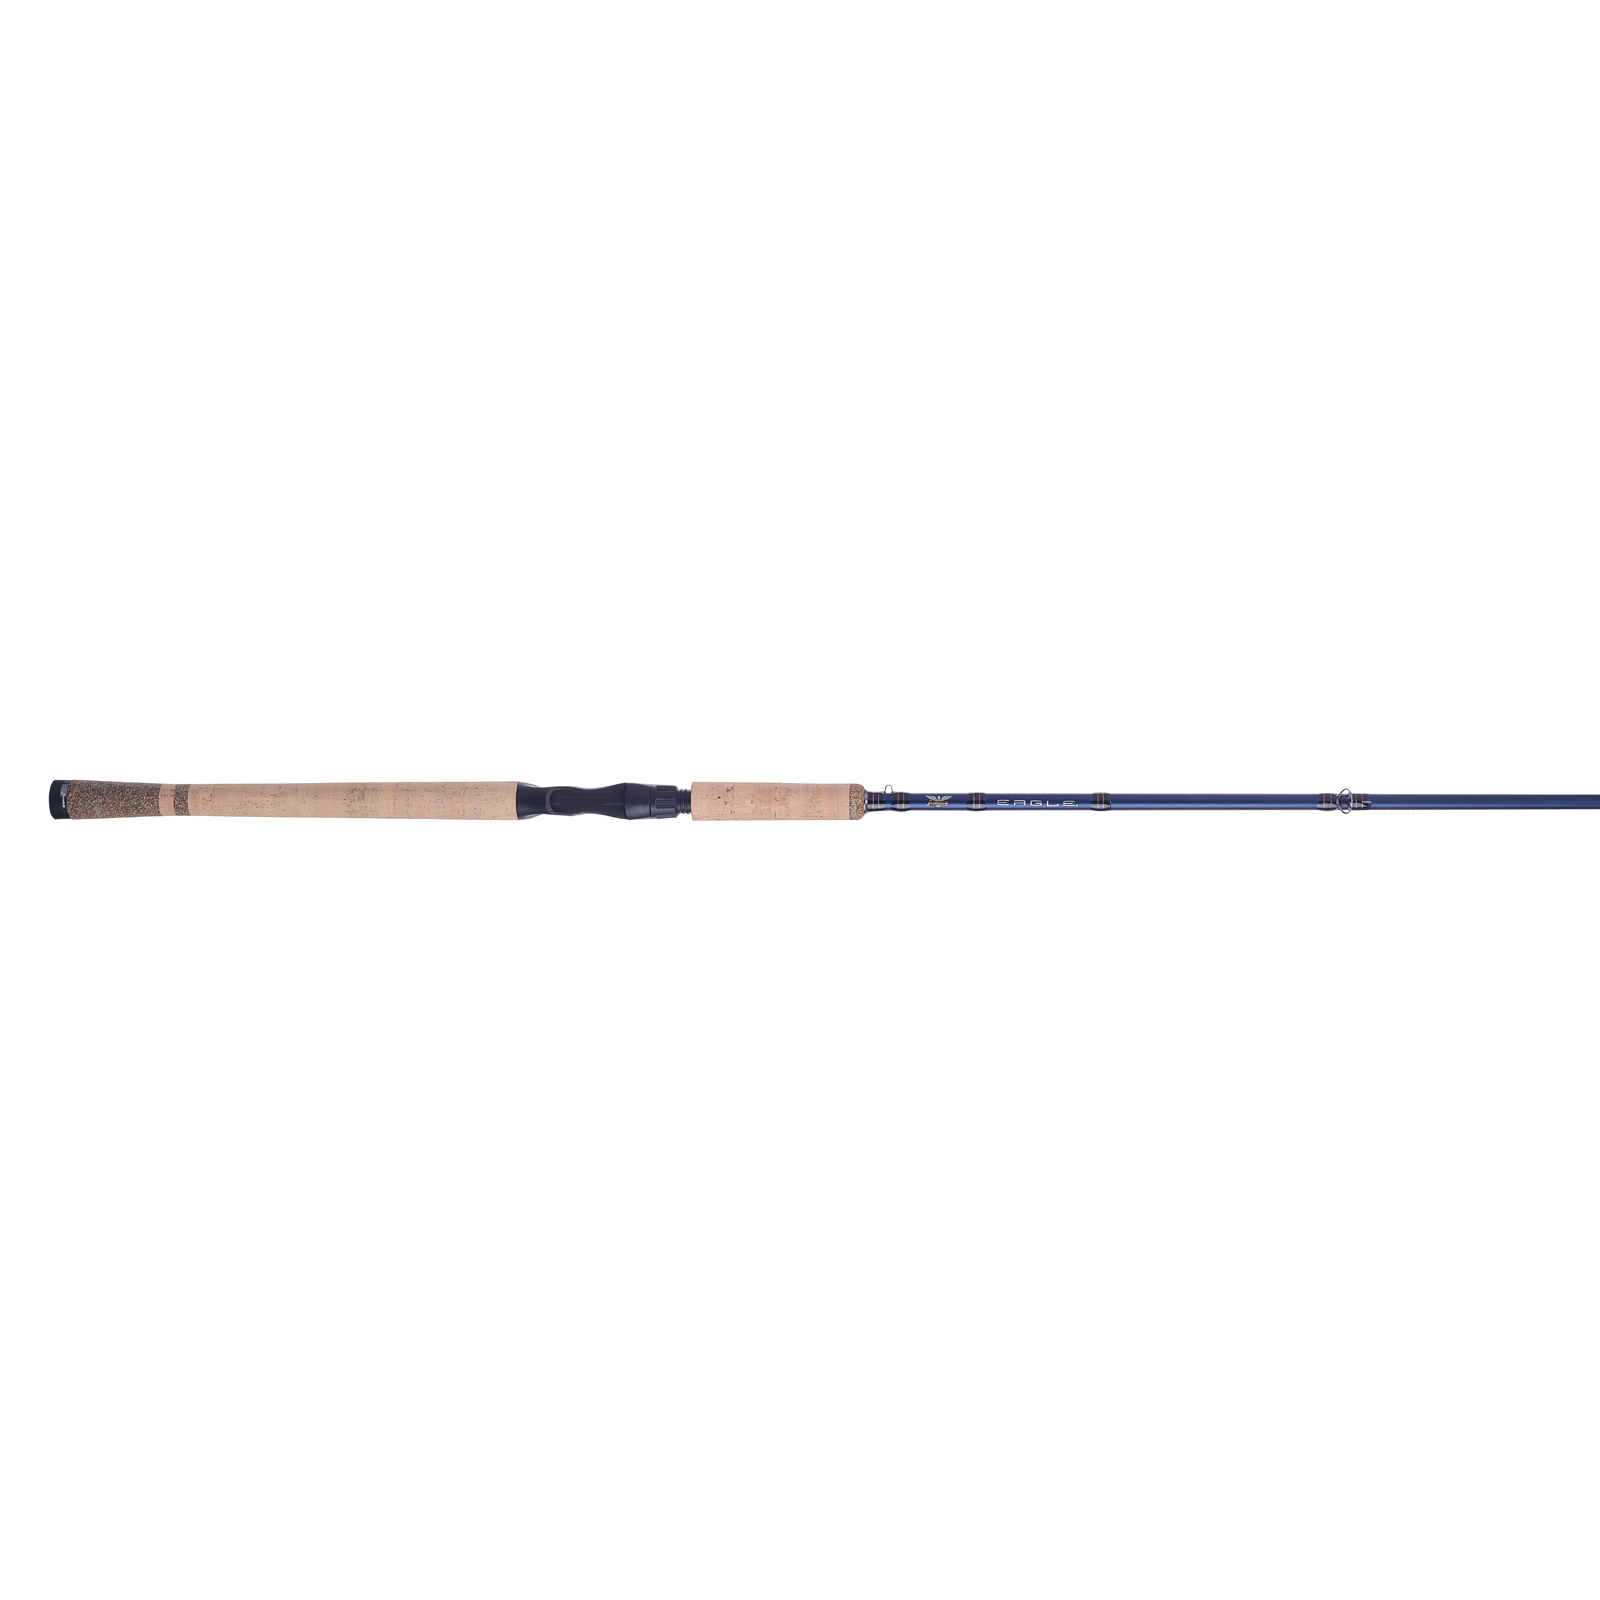 Fenwick Eagle Spinning Rod, Light 1 Piece, Med/Fast Tapper 2-8lb, 24 Ton  Graphite, Prem Cork, Tach Grip, SS Guide with Alum Oxite Insrts EAG70L-MFS  , $2.04 Off with Free S&H — CampSaver